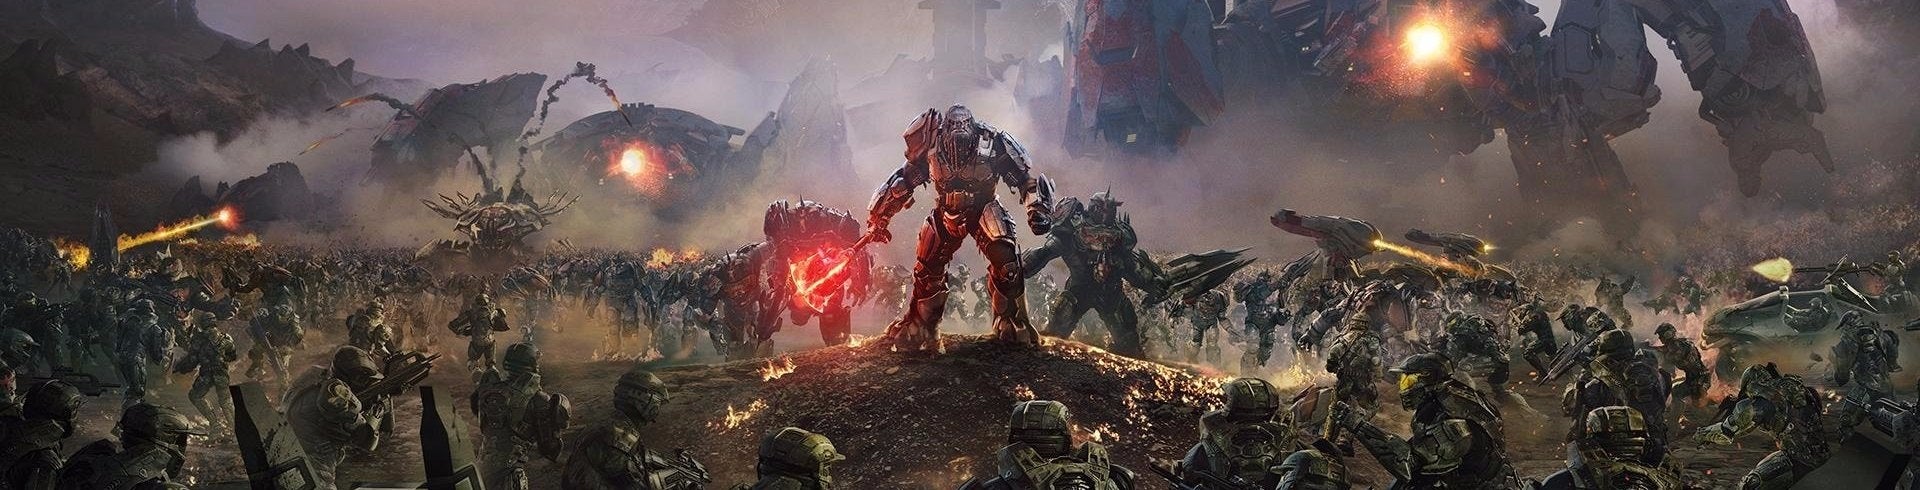 Image for Halo Wars 2 feels caught in No Man's Land